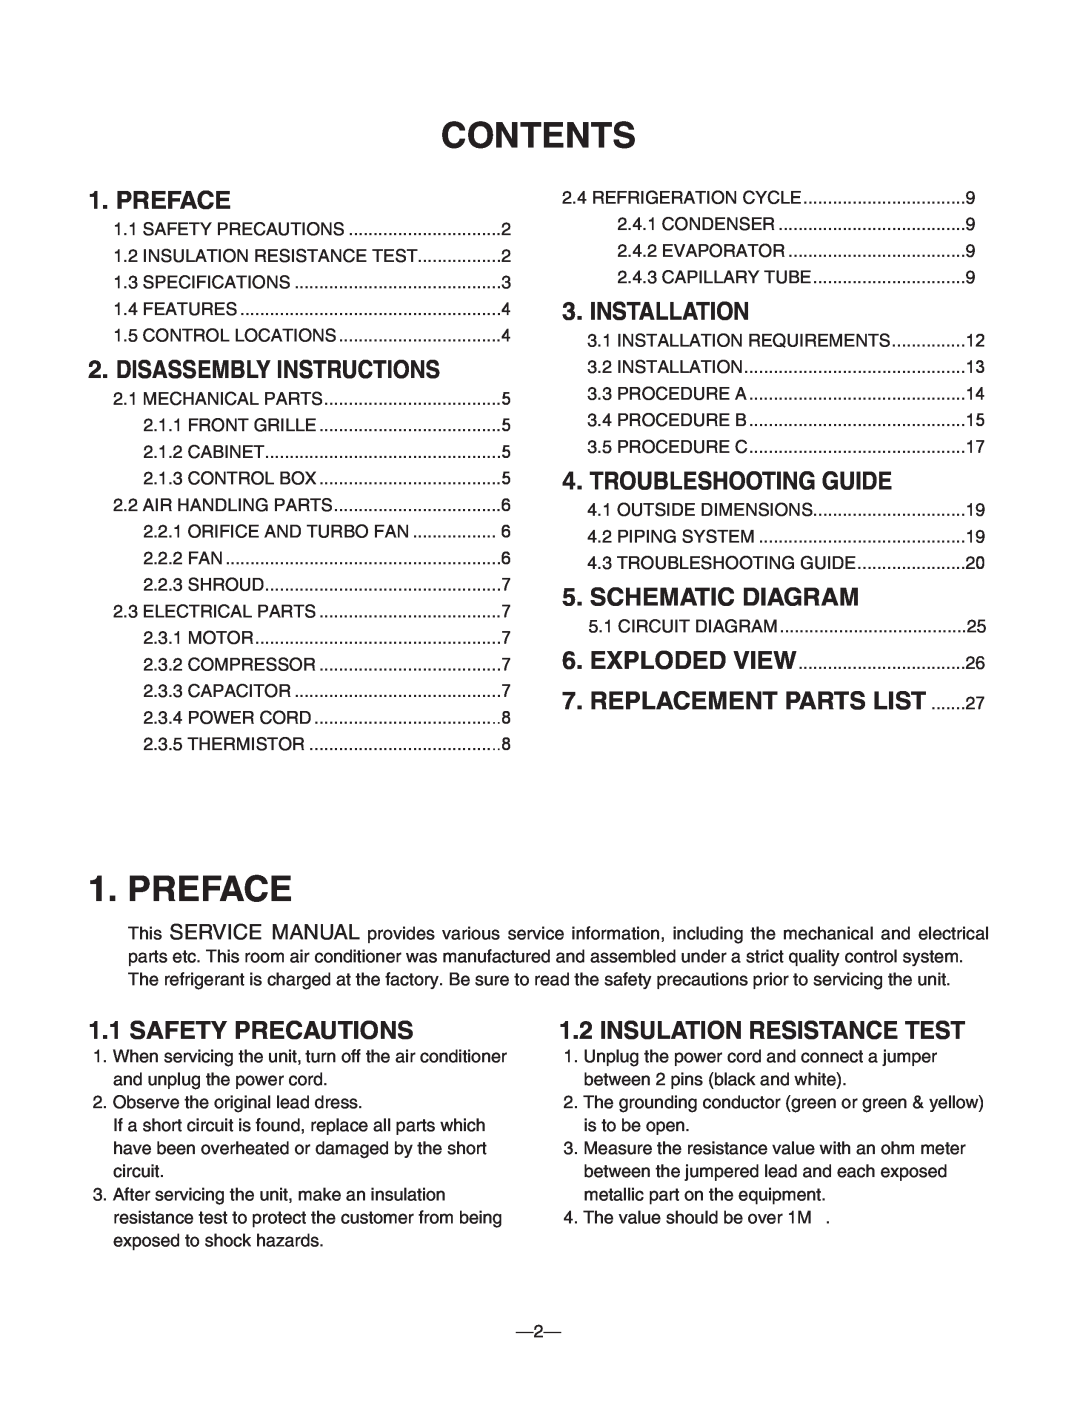 Heat Controller BG-103A service manual Contents, Preface, Disassembly Instructions, Installation, Troubleshooting Guide 